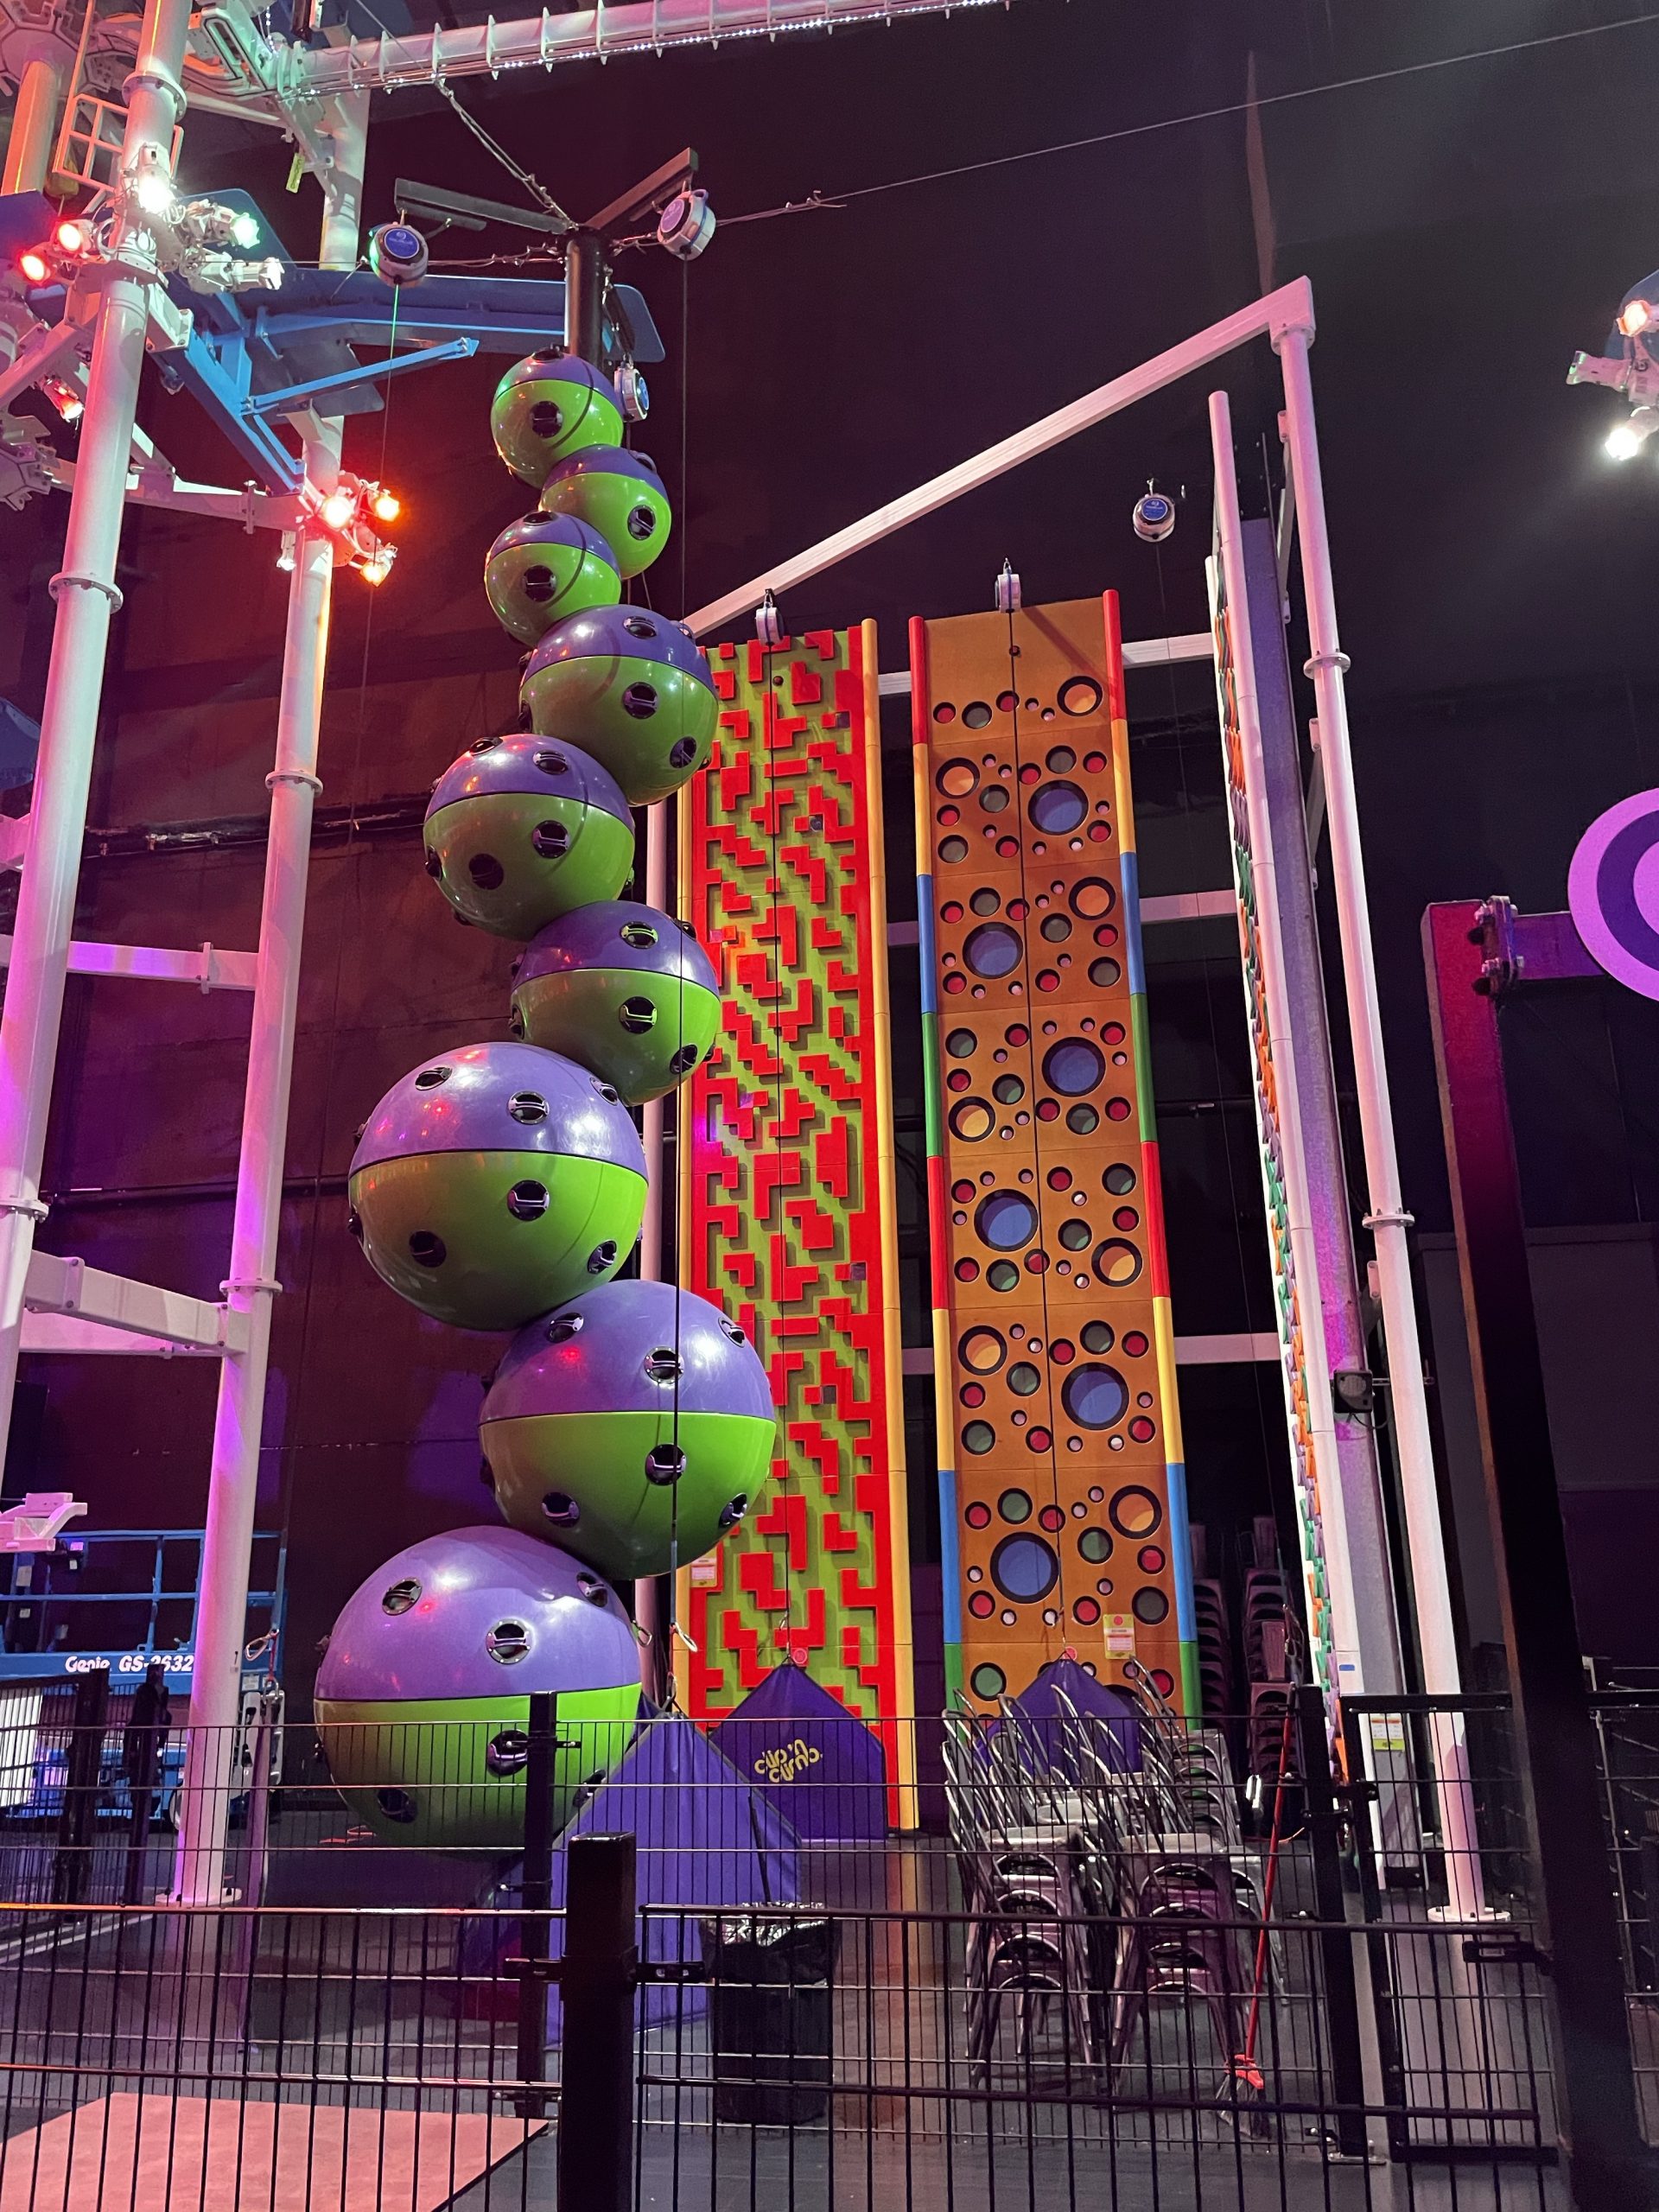 It Indoor adventure Ropes Course in New Haven Connecticut with kids